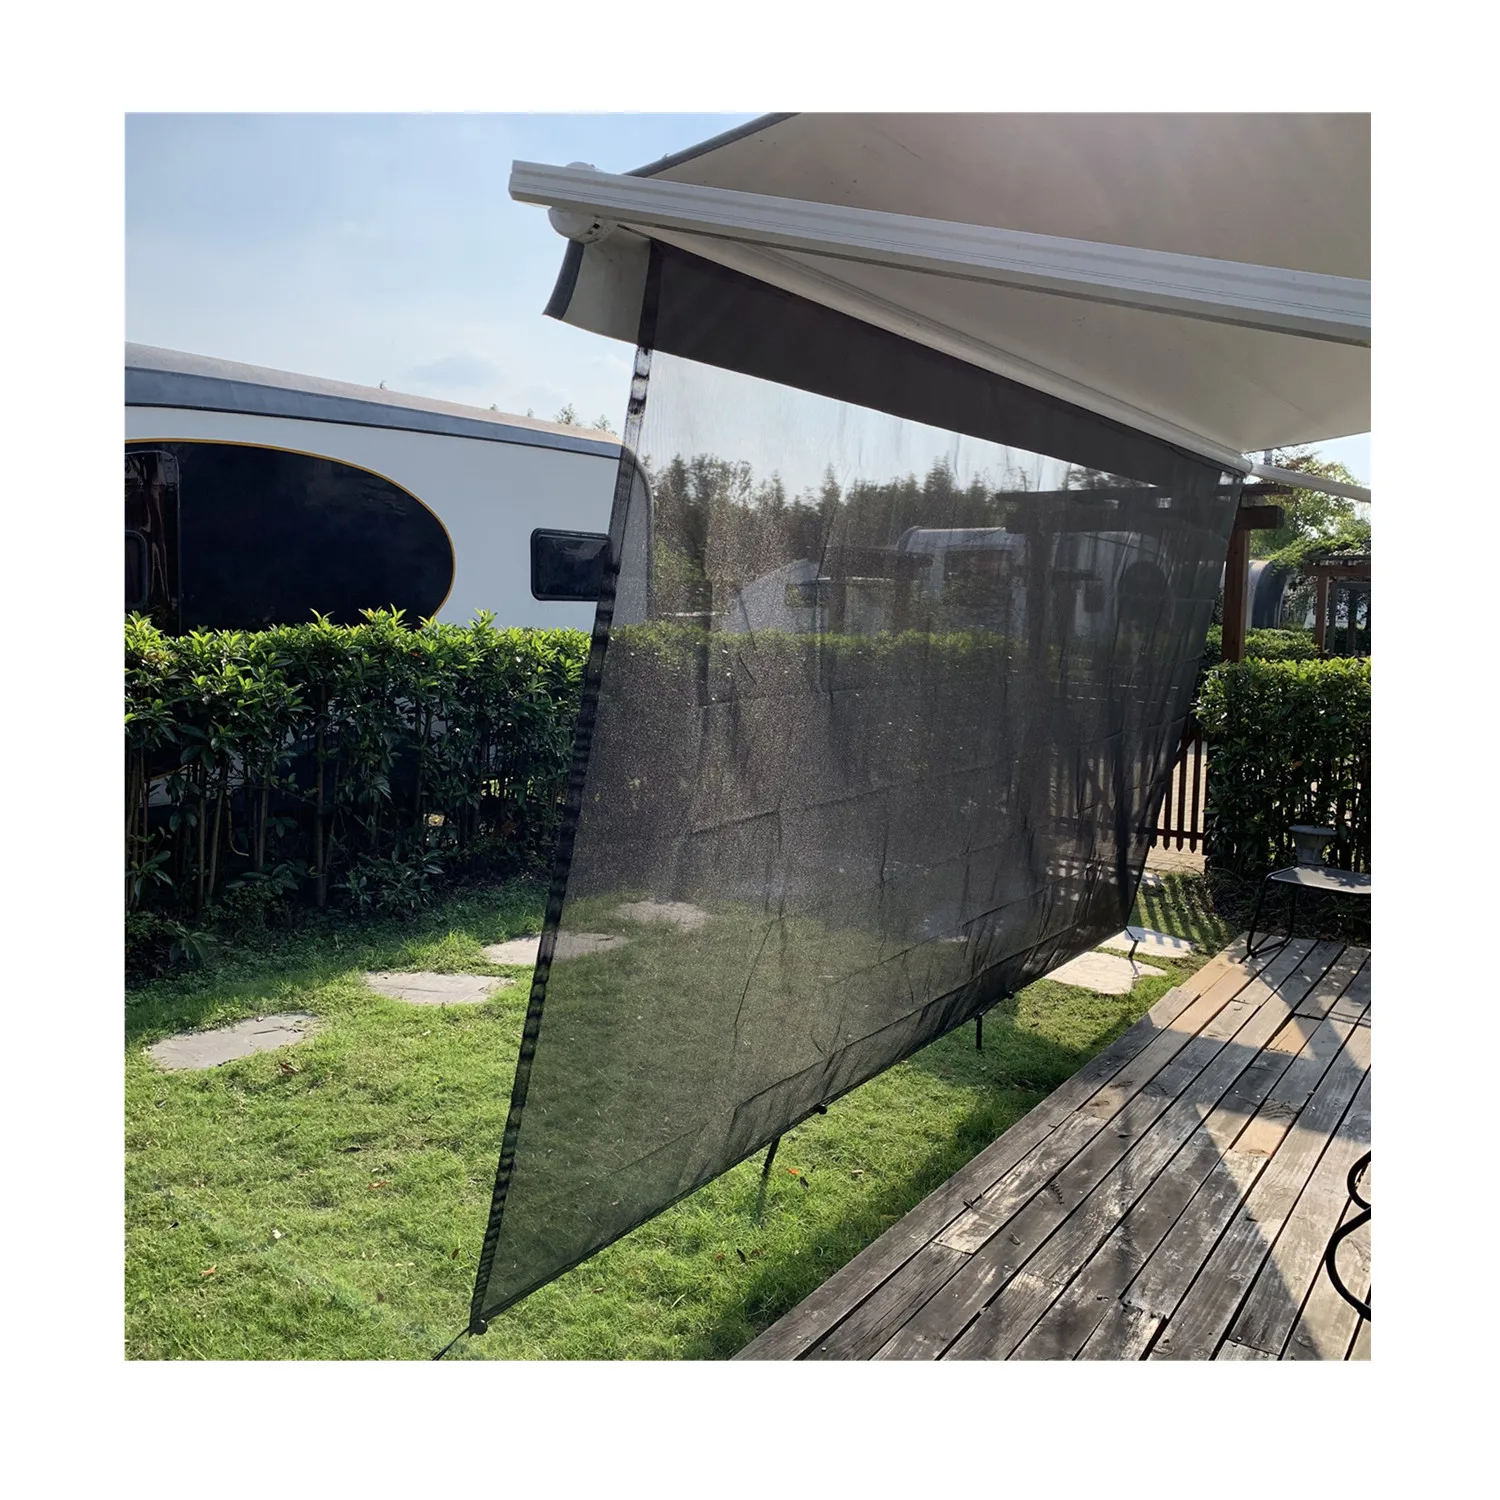 

Hot Sale Black Mesh Sunshade Screen 9'X15' 3" RV Awning Shade for Camping Trailer Canopy UV Sun Blocker Complete Kits, Black, beige, gift blue, brown, navy blue or customized